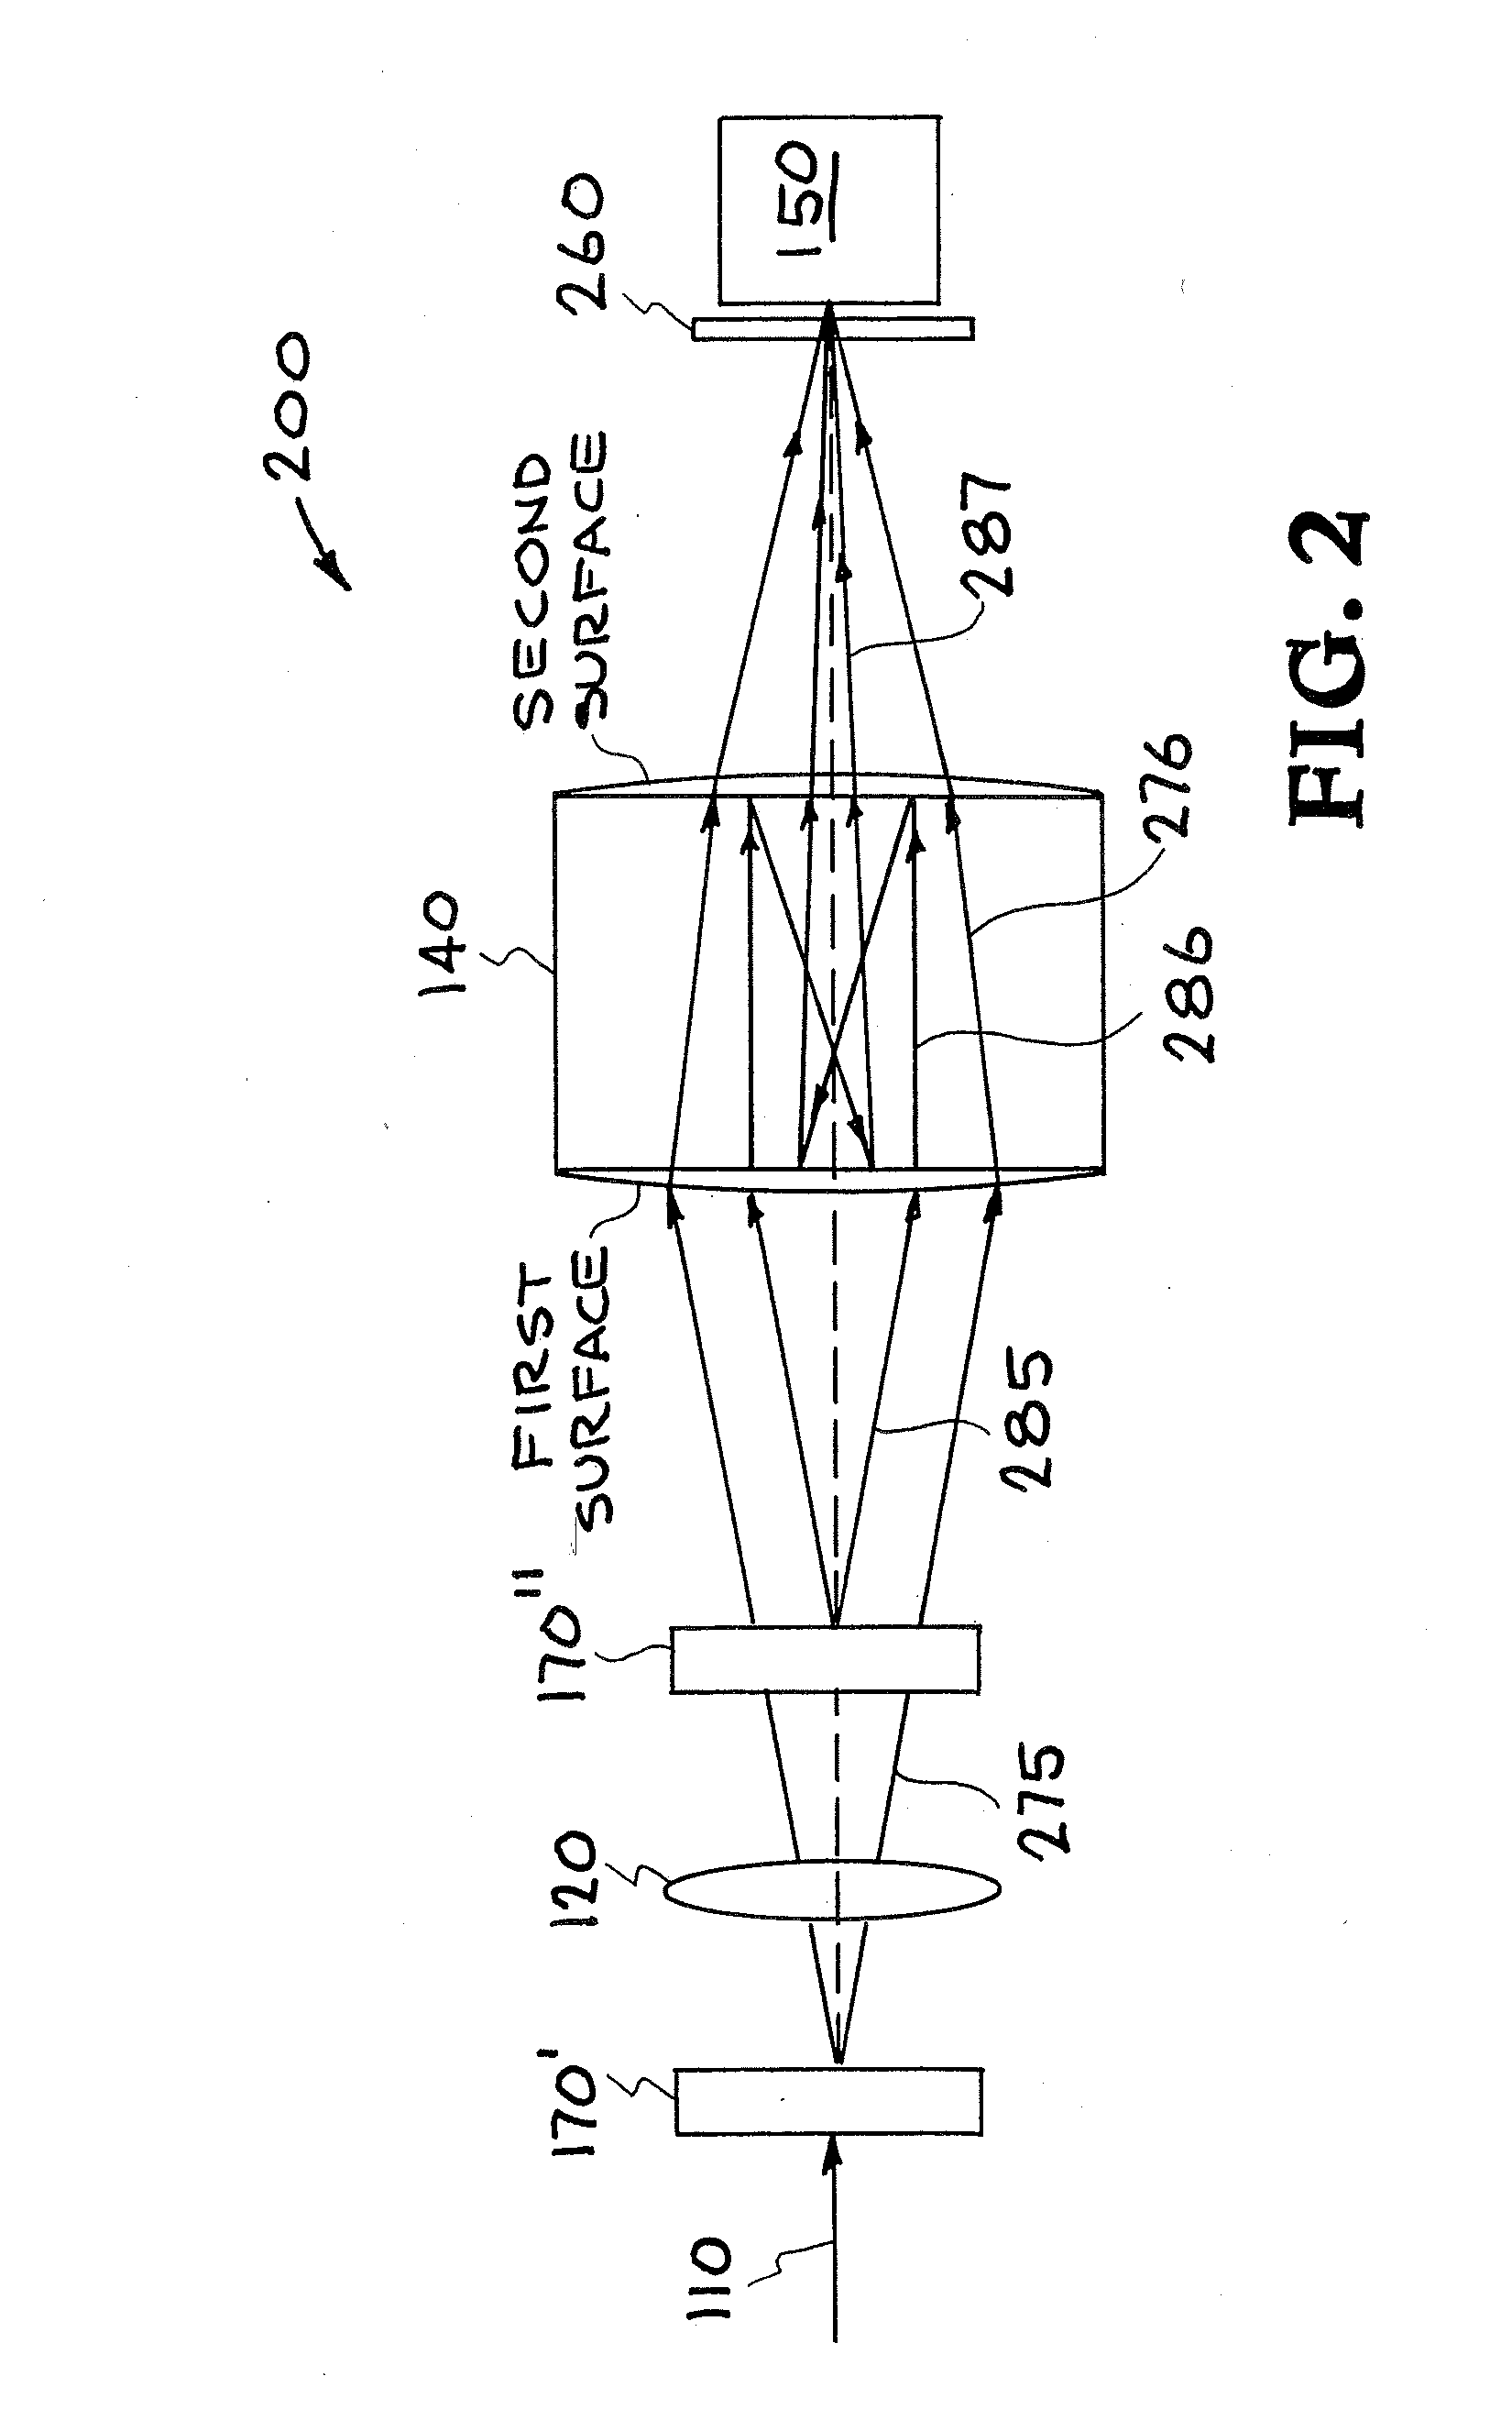 Laser beam centering and pointing system